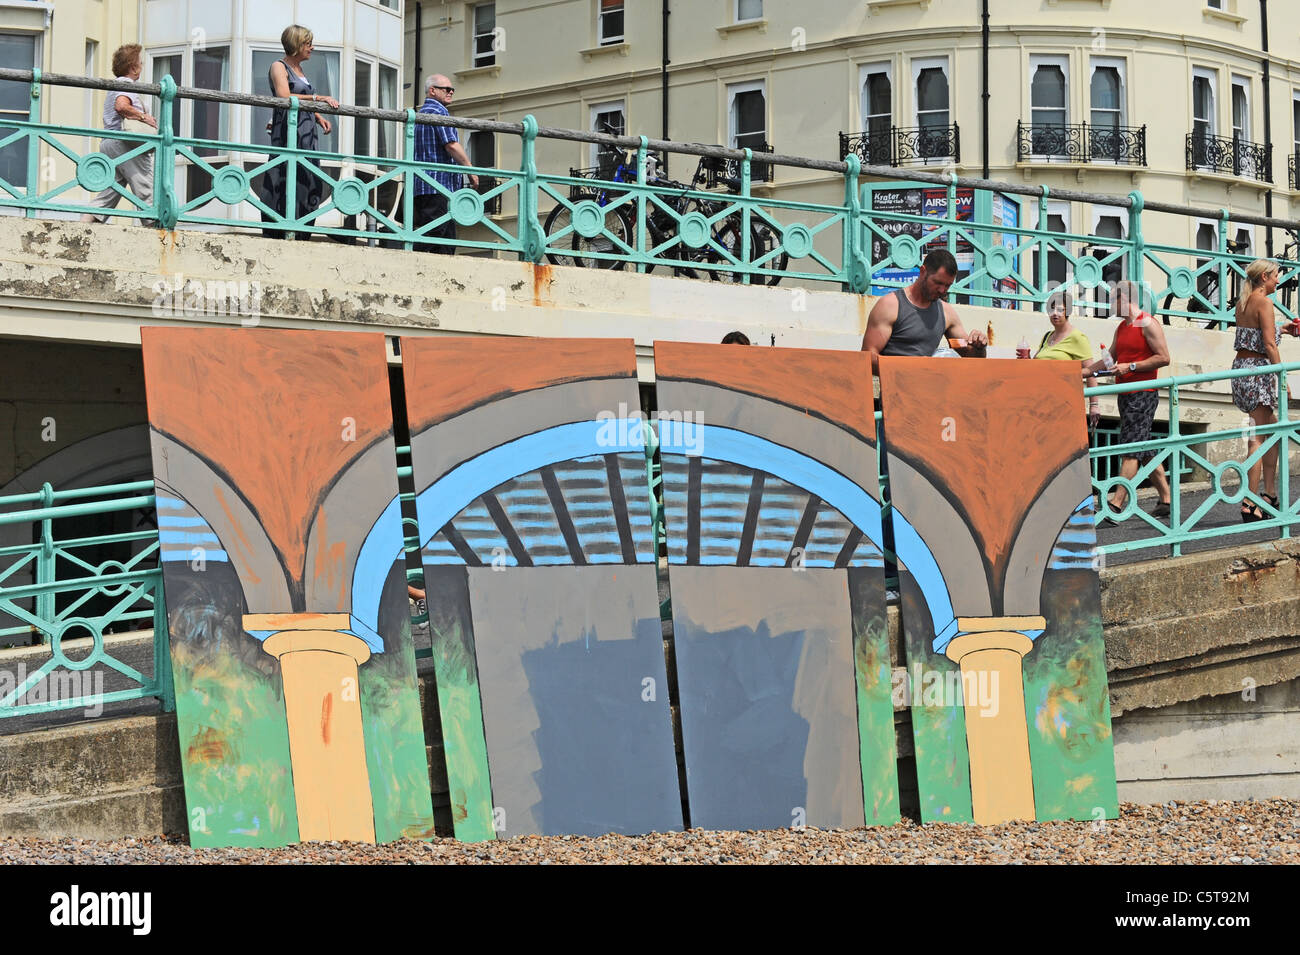 A man paints a large piece of artwork showing the seafront arches along Brighton beach today Stock Photo